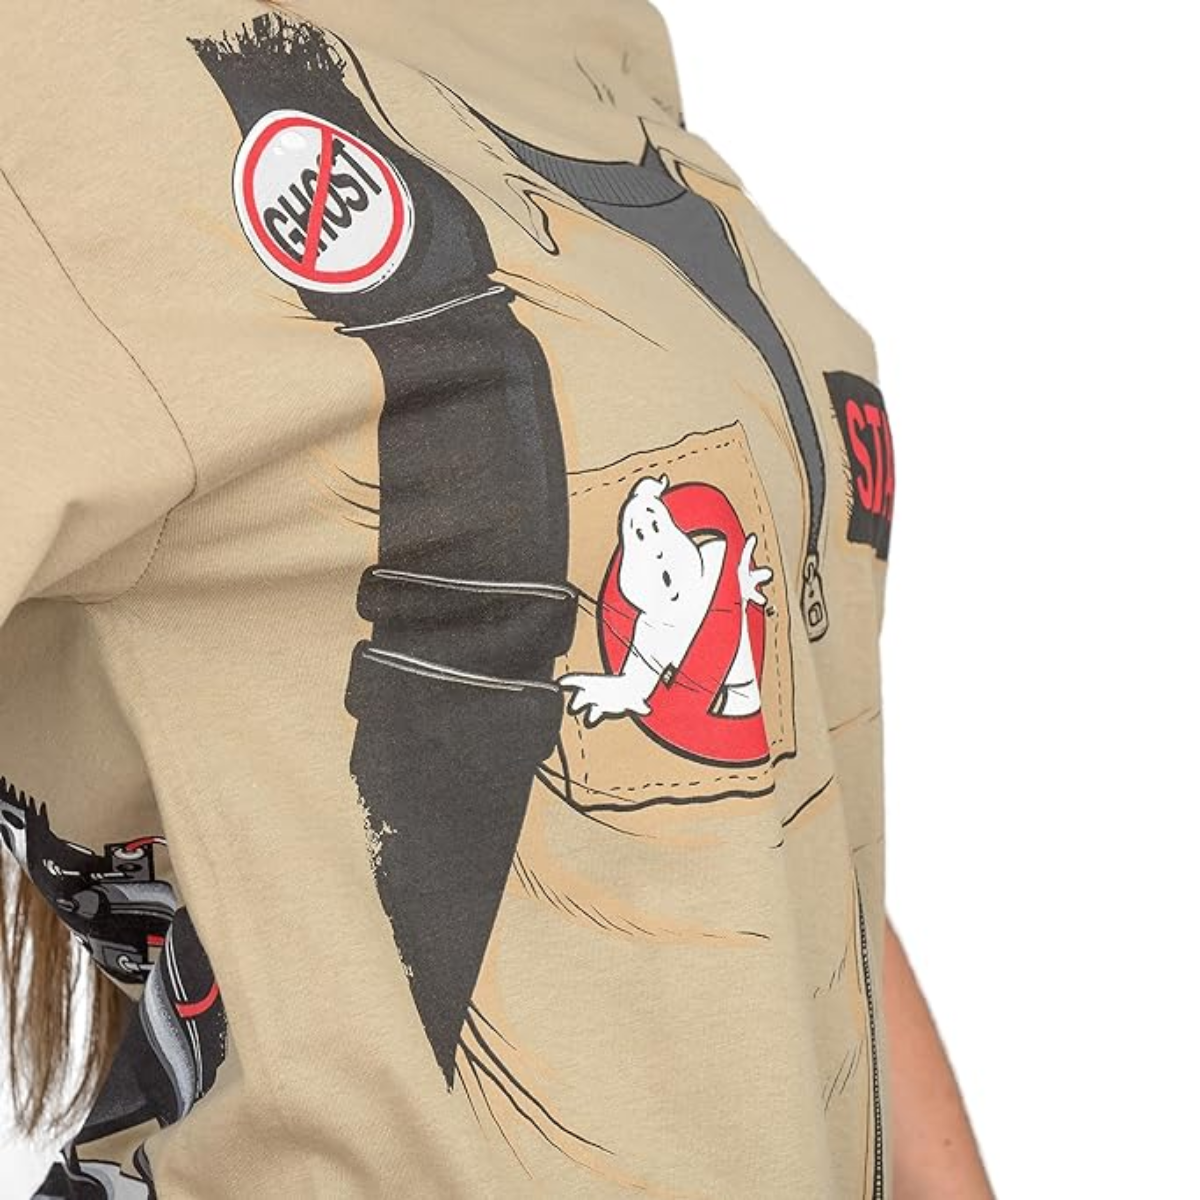 Ghostbuster Short Sleeve Costume T-Shirt with Back Print